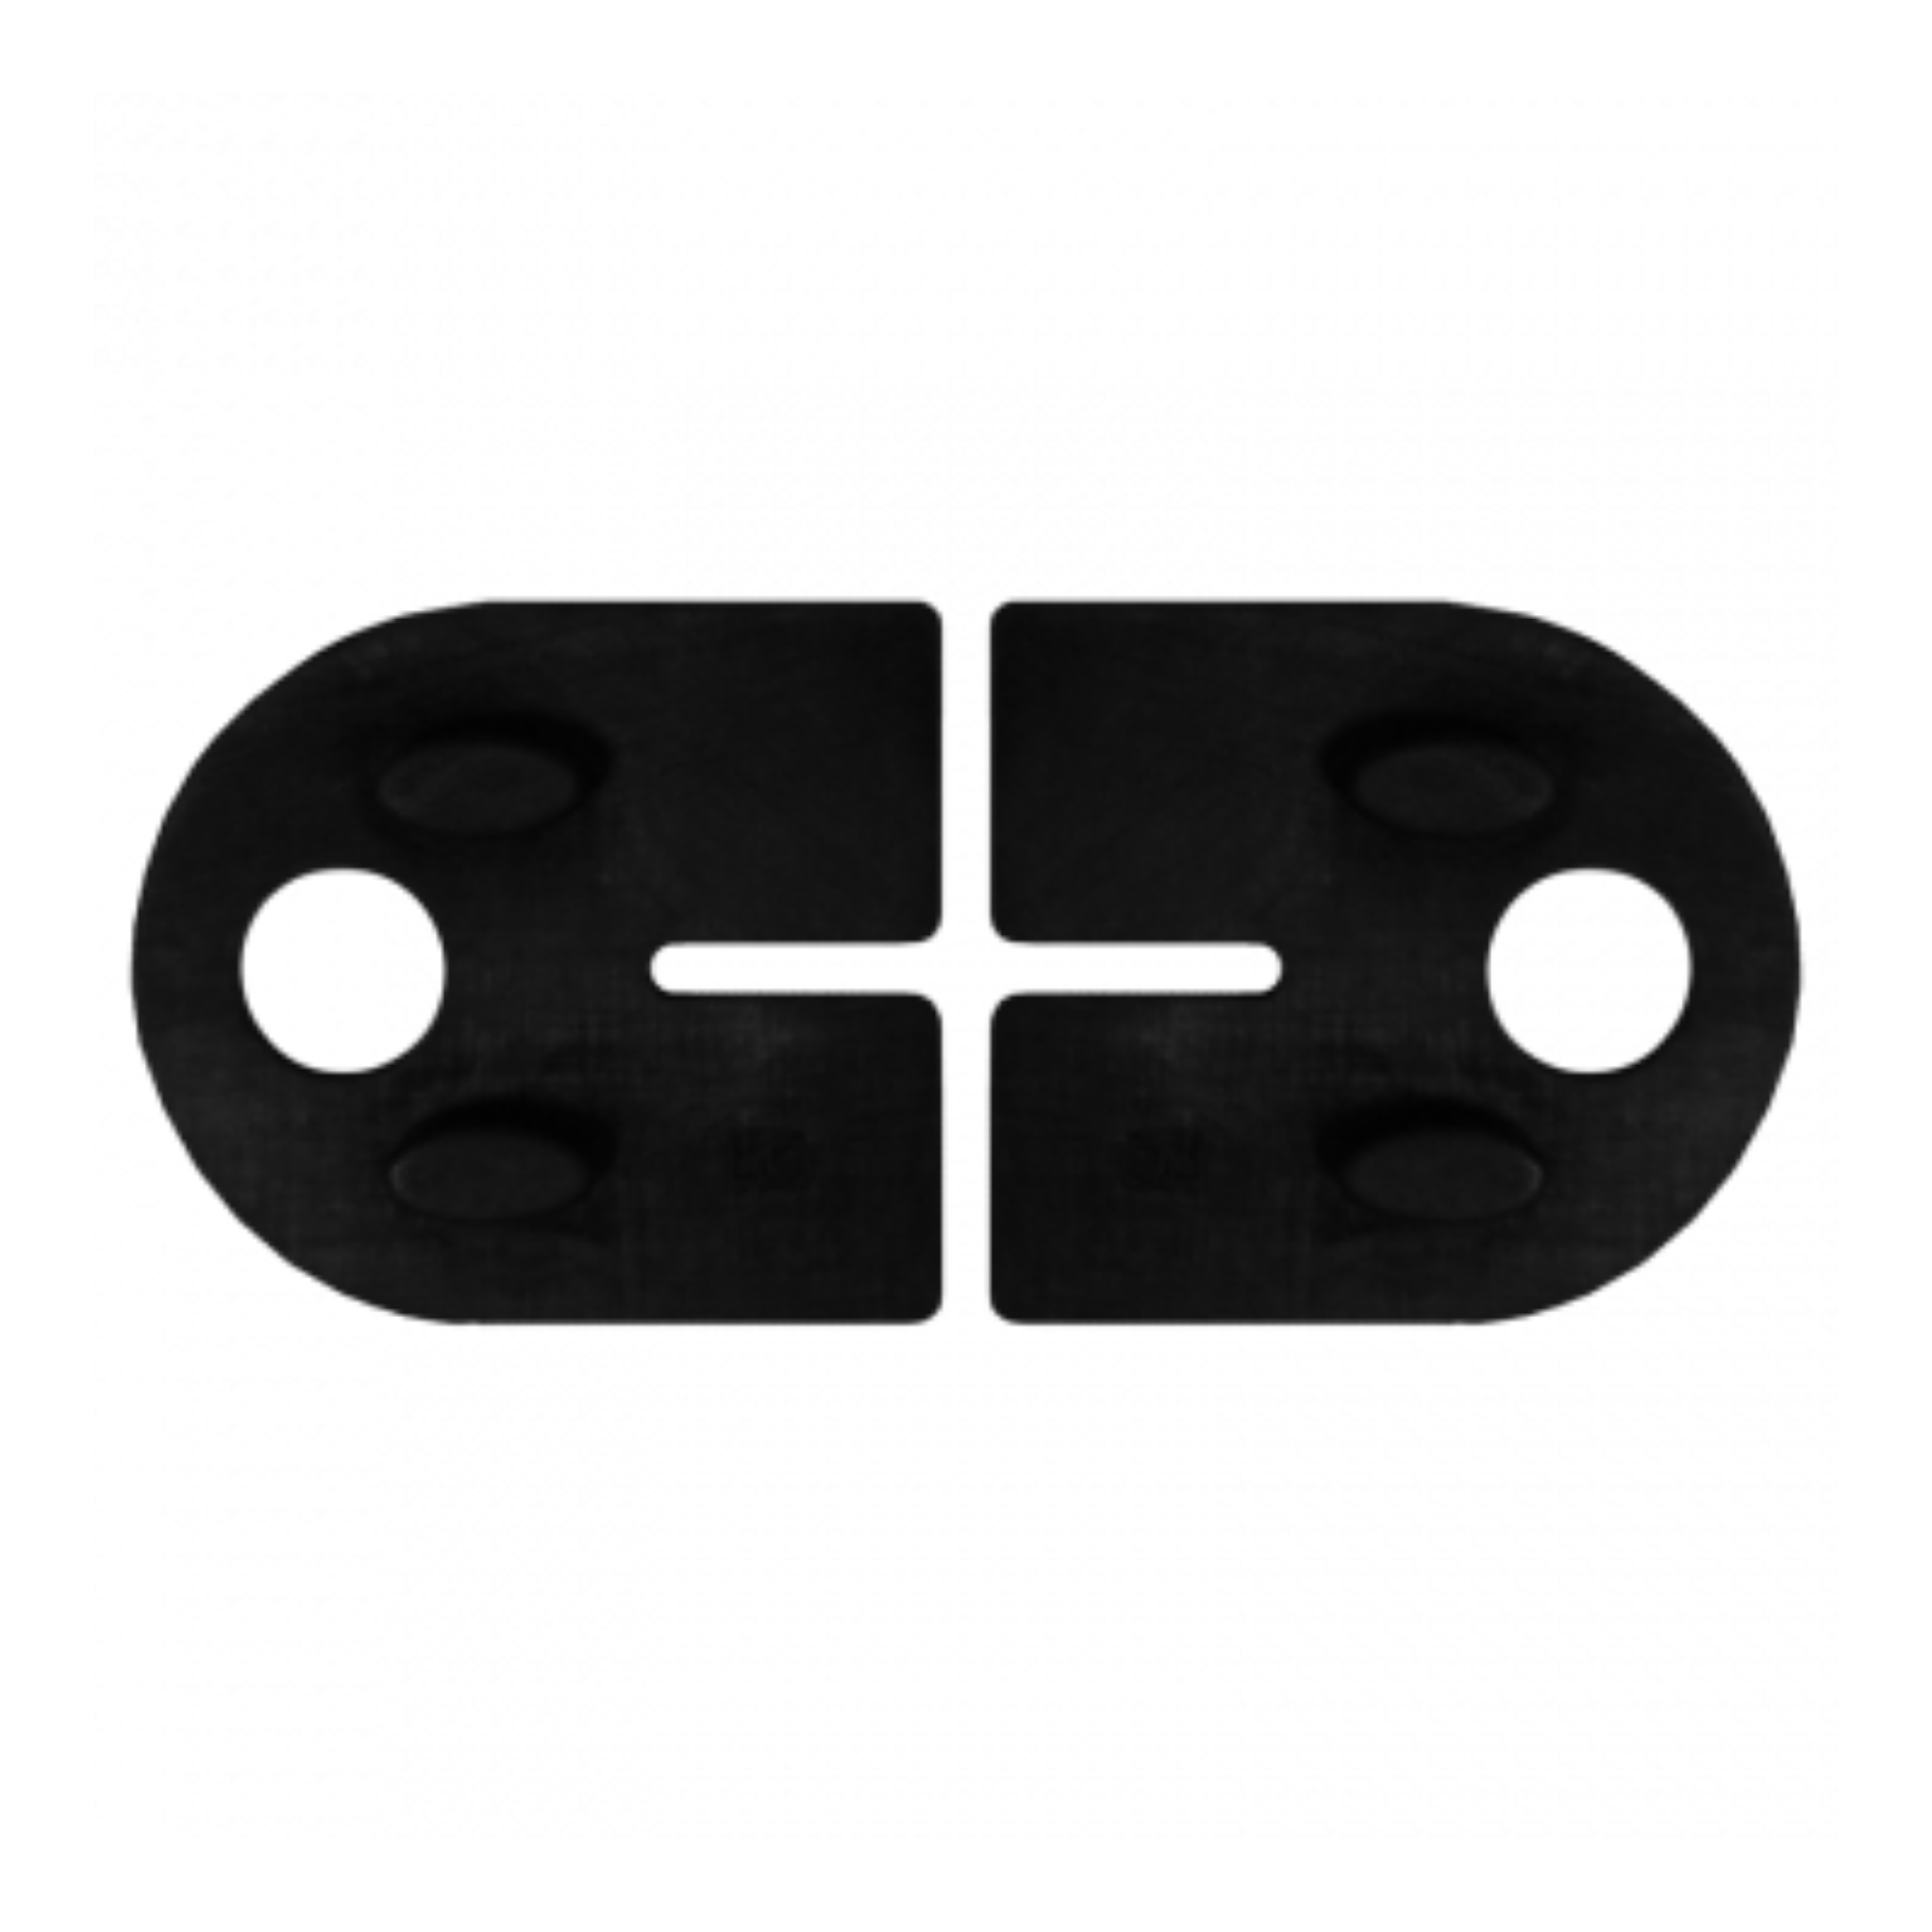 (G) Rubber inlay for glass clamp - StroFIX